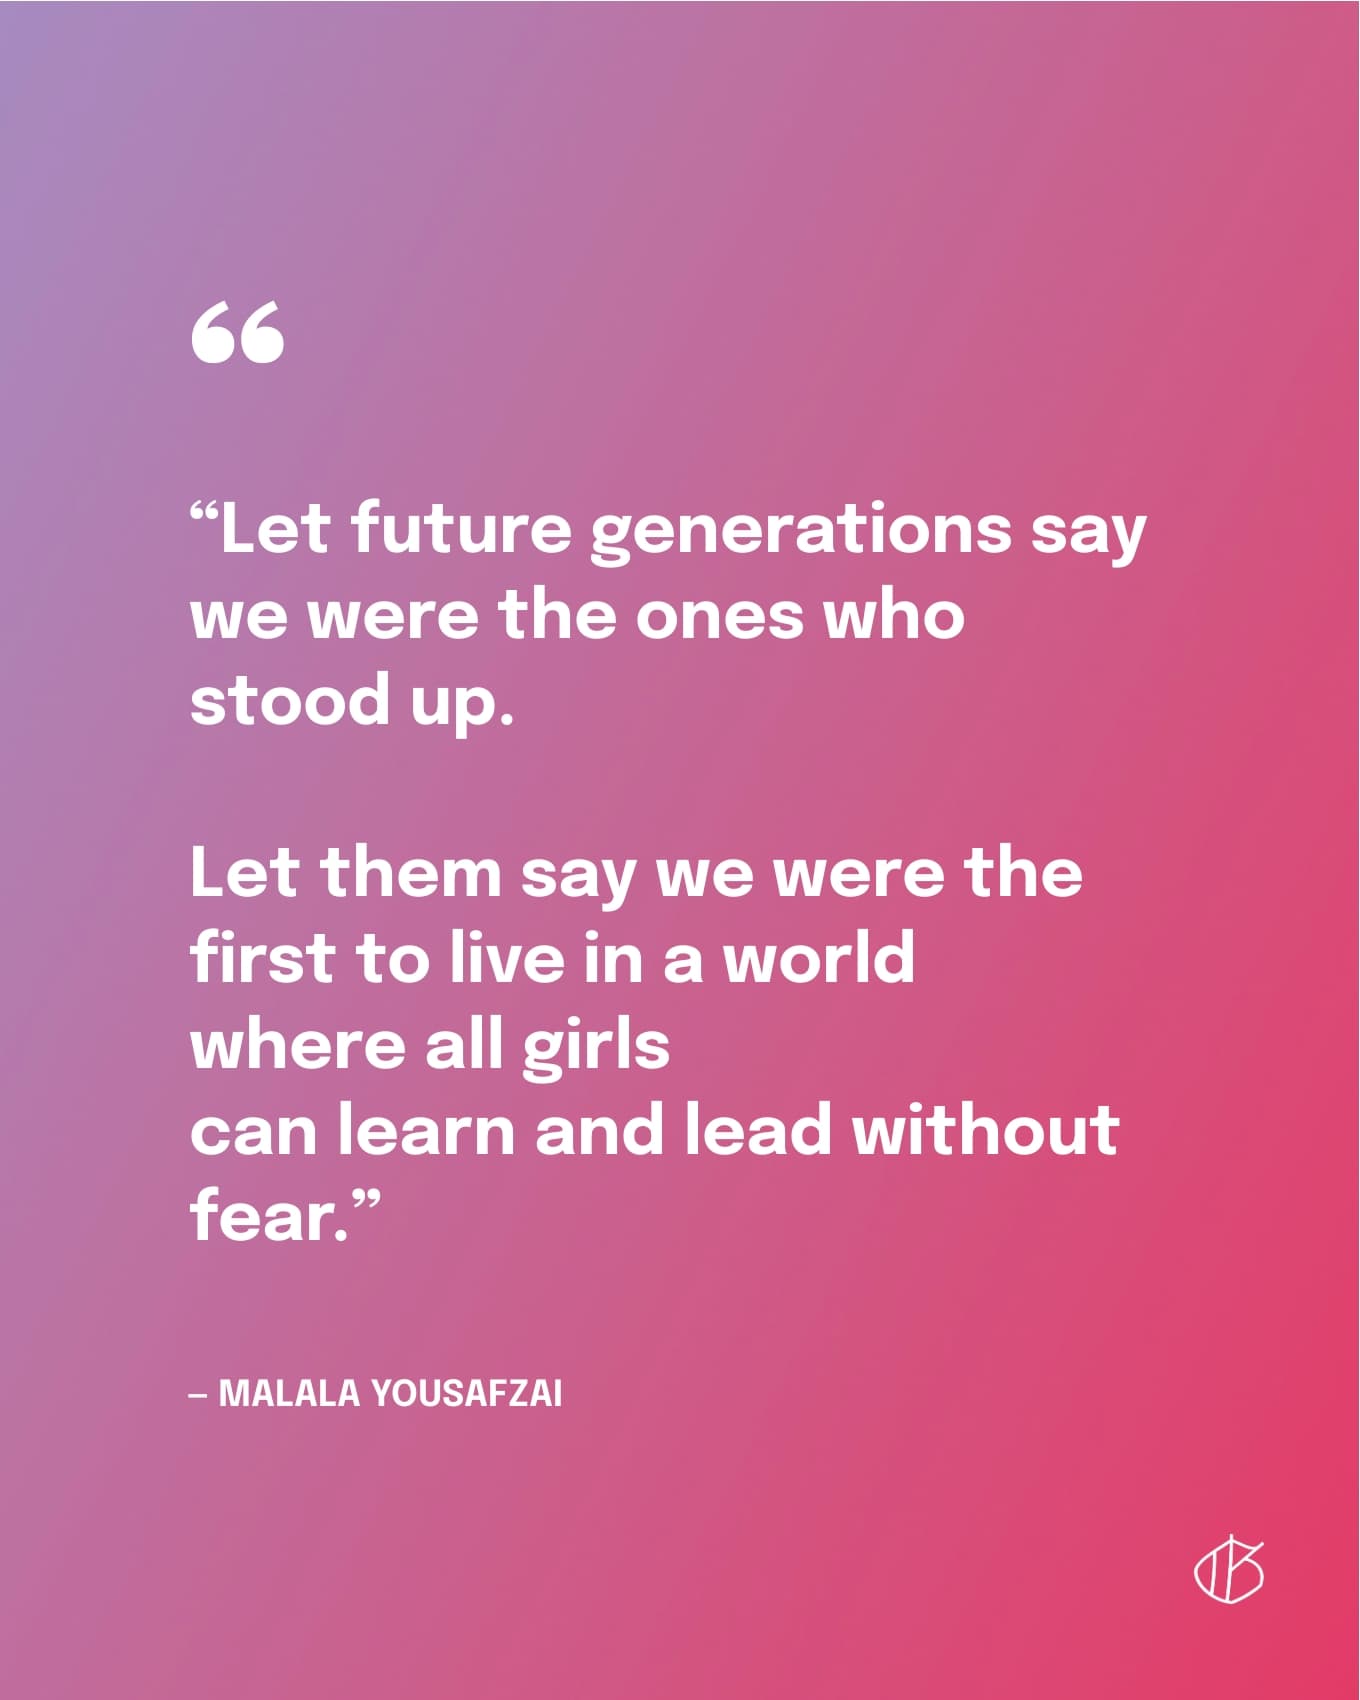 “Let future generations say we were the ones who stood up. Let them say we were the first to live in a world where all girls can learn and lead without fear.” — Malala Yousafzai